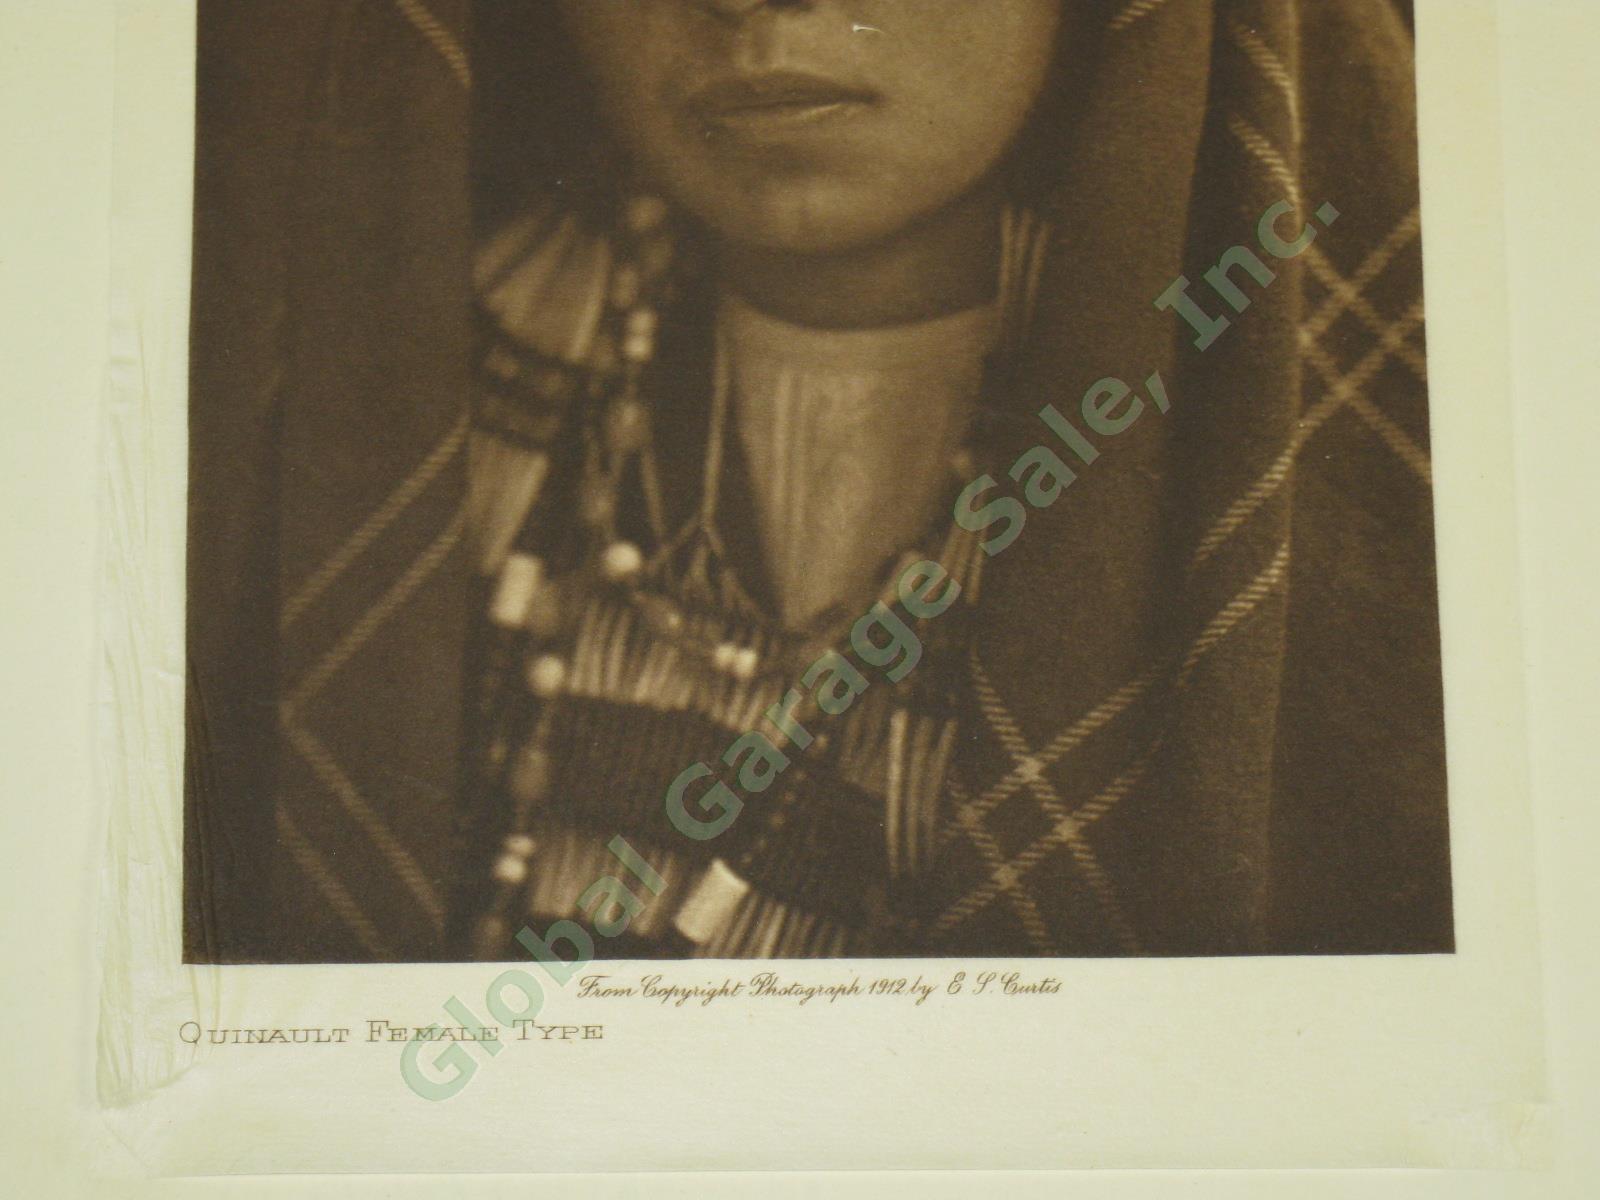 1912 Edward Curtis Photo On Japanese Tissue Quinault Female Type Native American 3